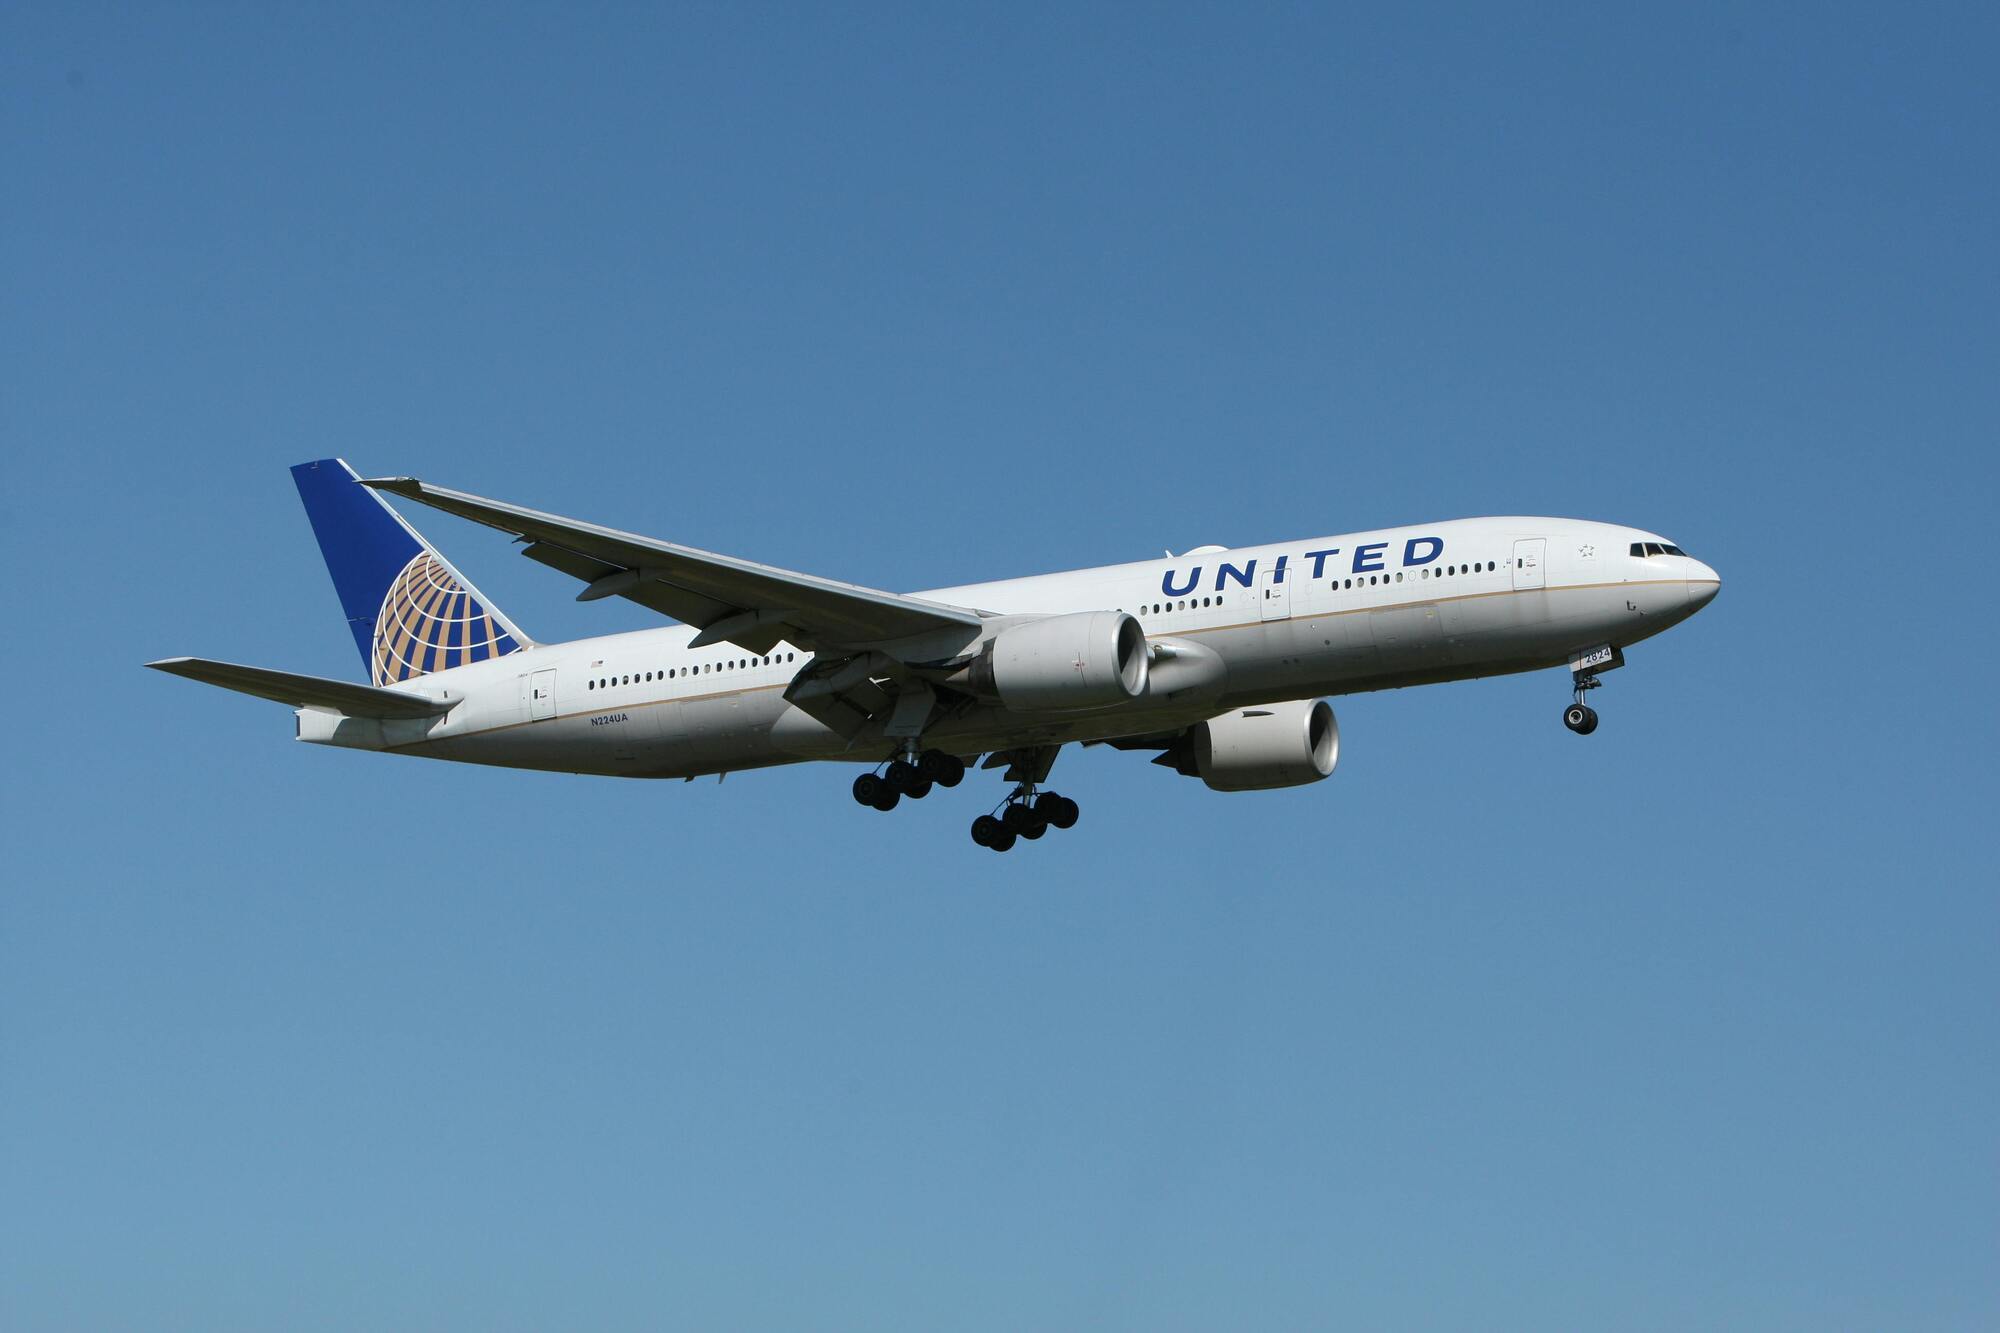 Father files a lawsuit against United Airlines over injury to daughter's arm sustained during a flight